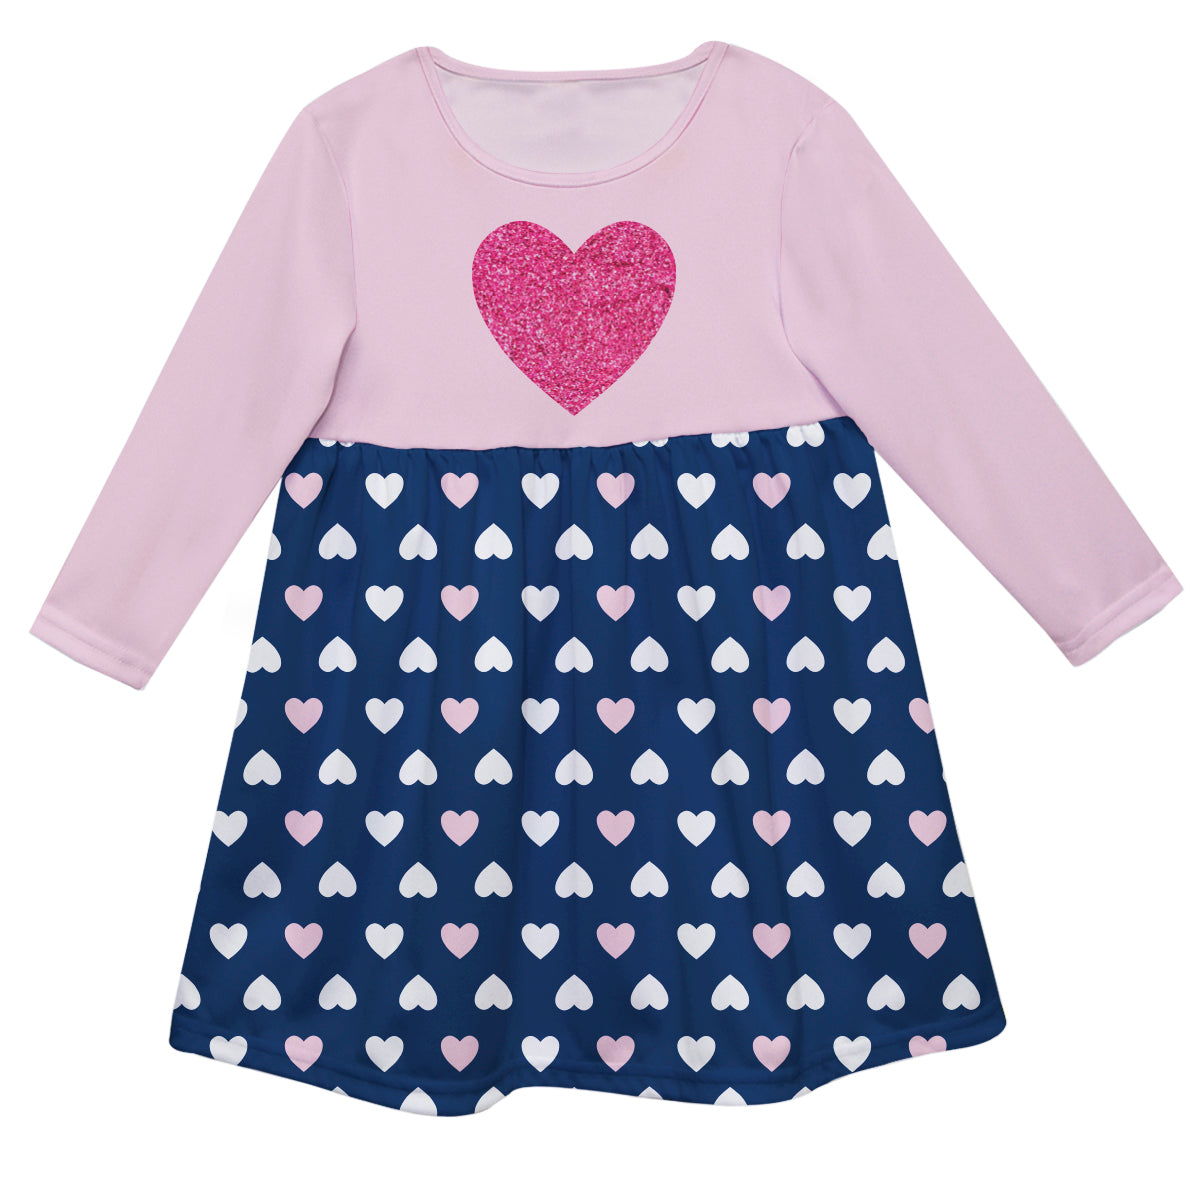 Hearts Print Pink and Navy Long Sleeve Epic Dress